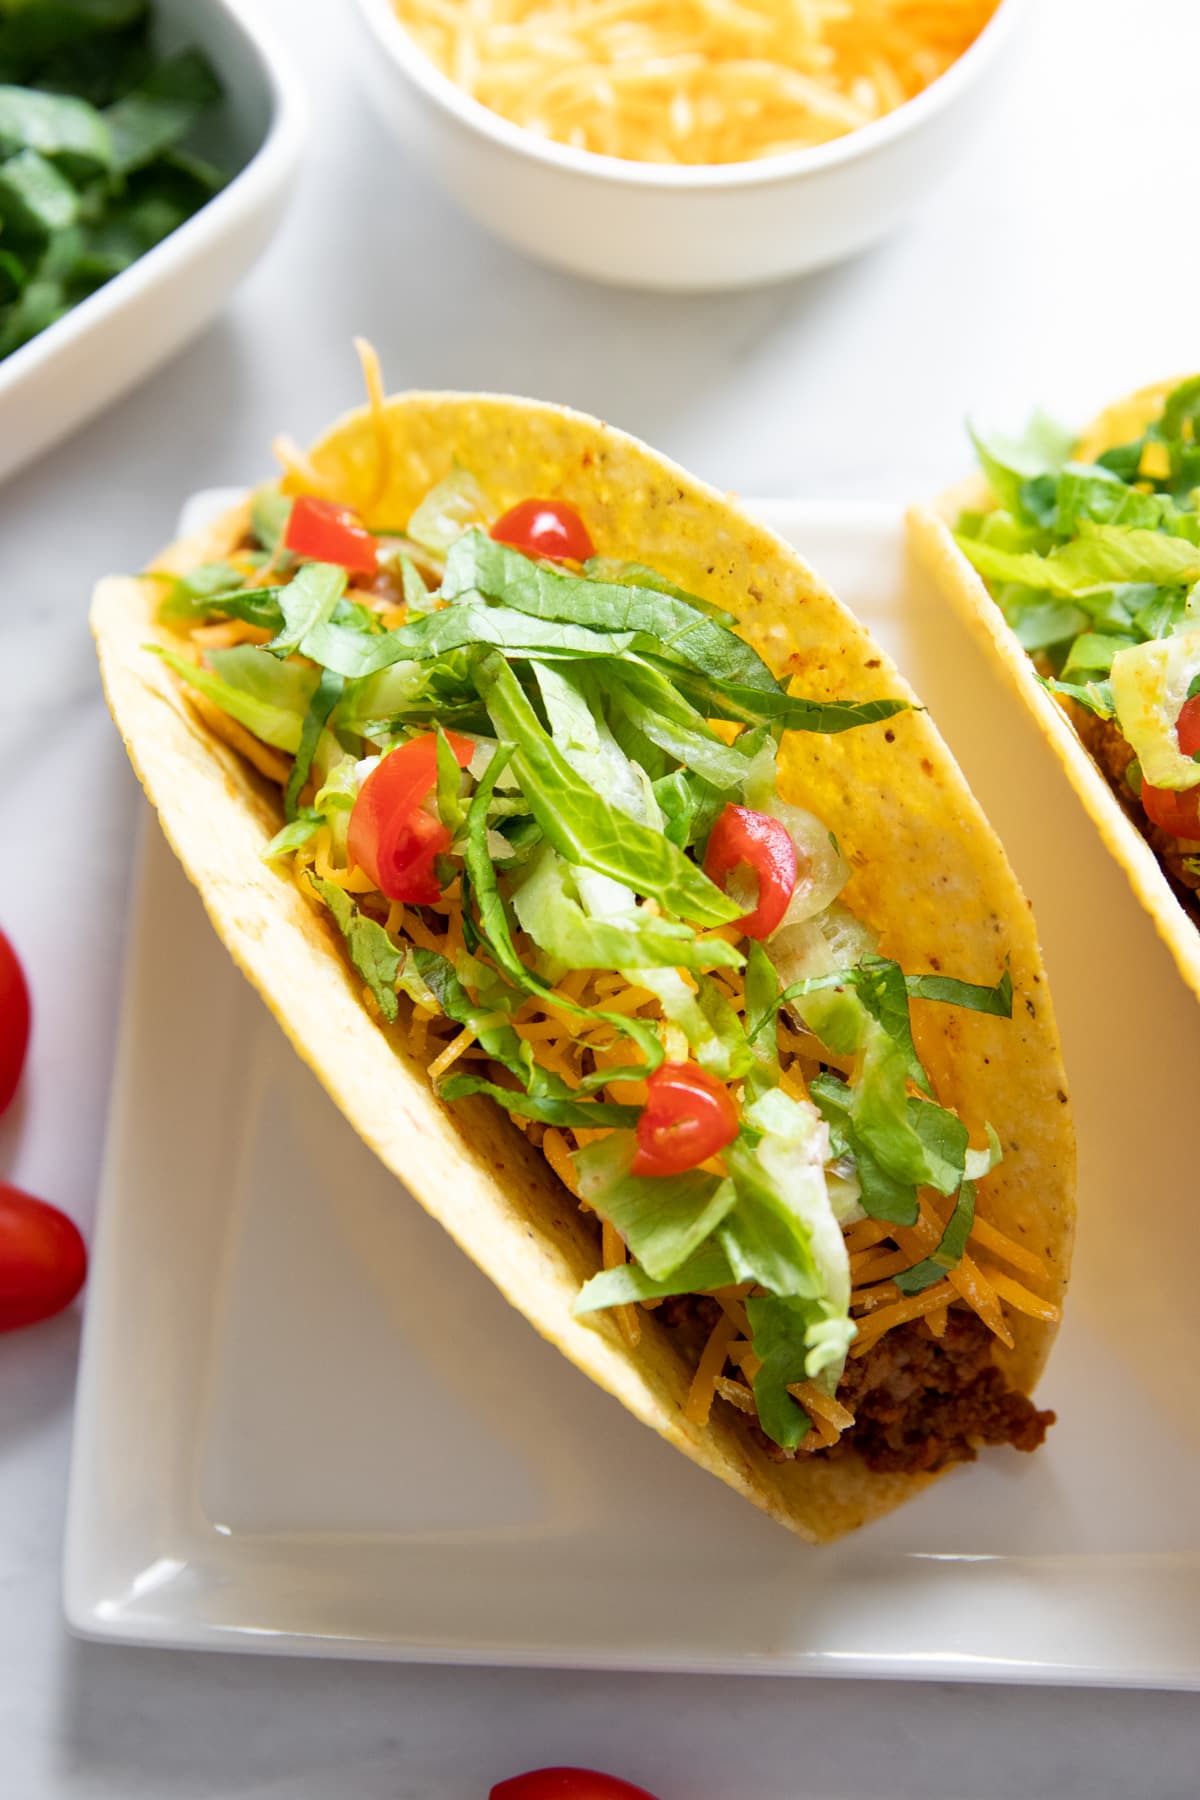 A hard shell taco sits on a rectangular plate. It's surrounded by  small dishes of shredded lettuce and shredded cheddar cheese, as well as a couple of whole cherry tomatoes for decoration.